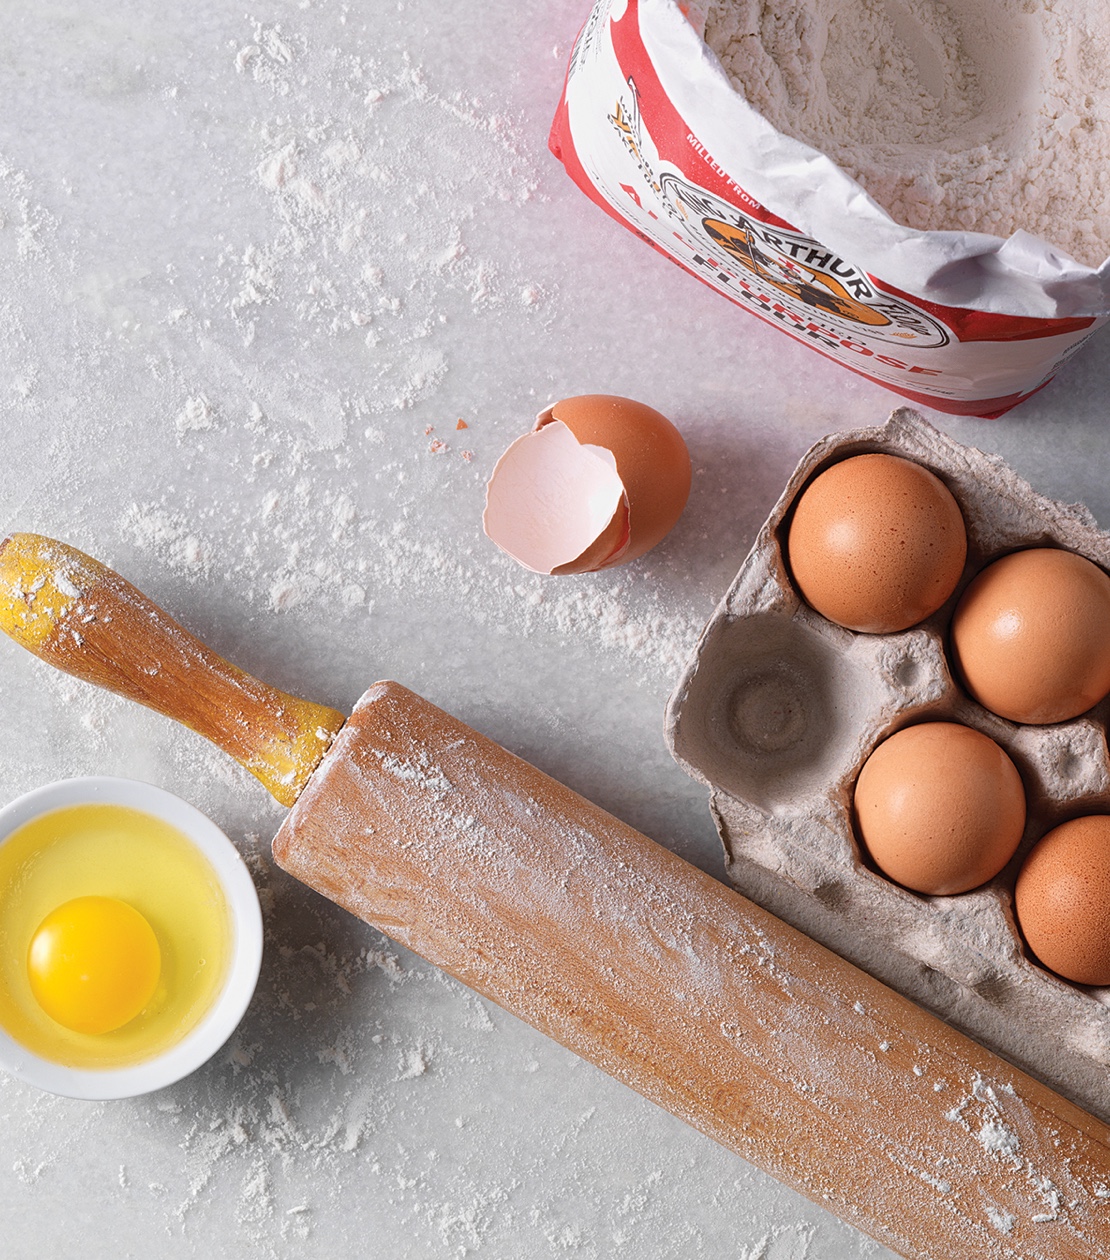 Flour, eggs, and a rolling pin